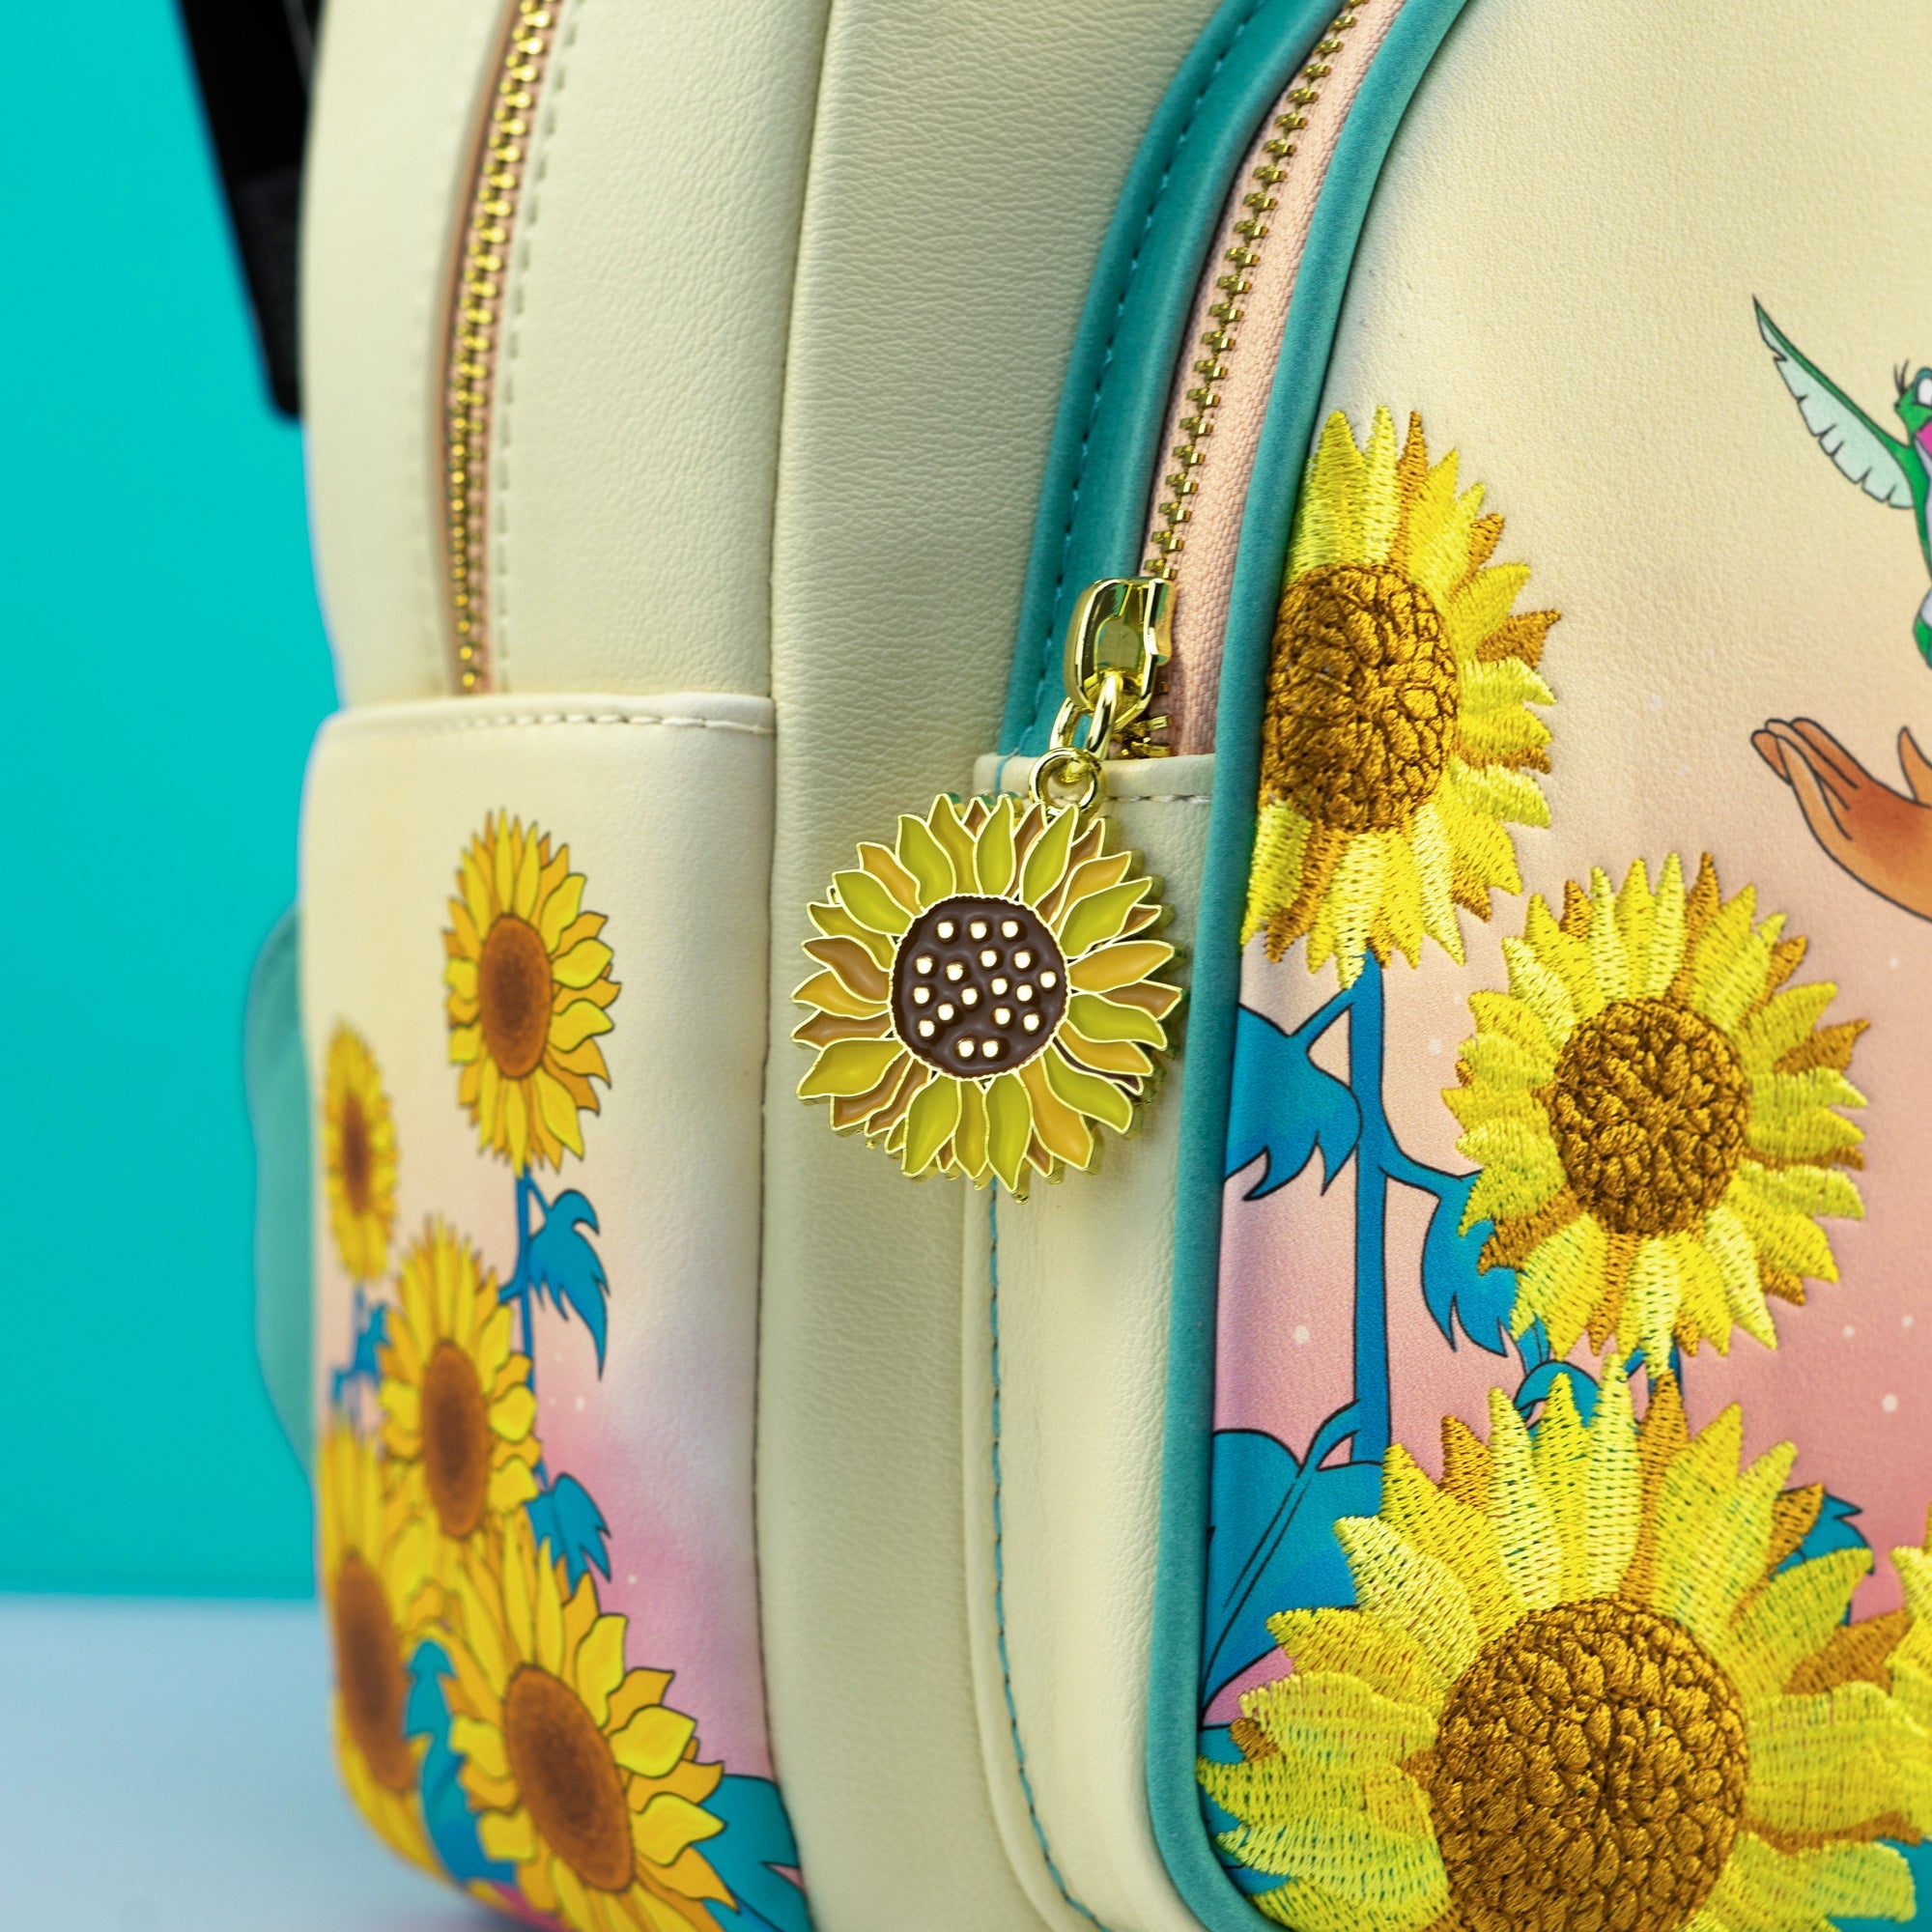 Loungefly x Disney Pocahontas Sunflowers Mini Backpack - GeekCore